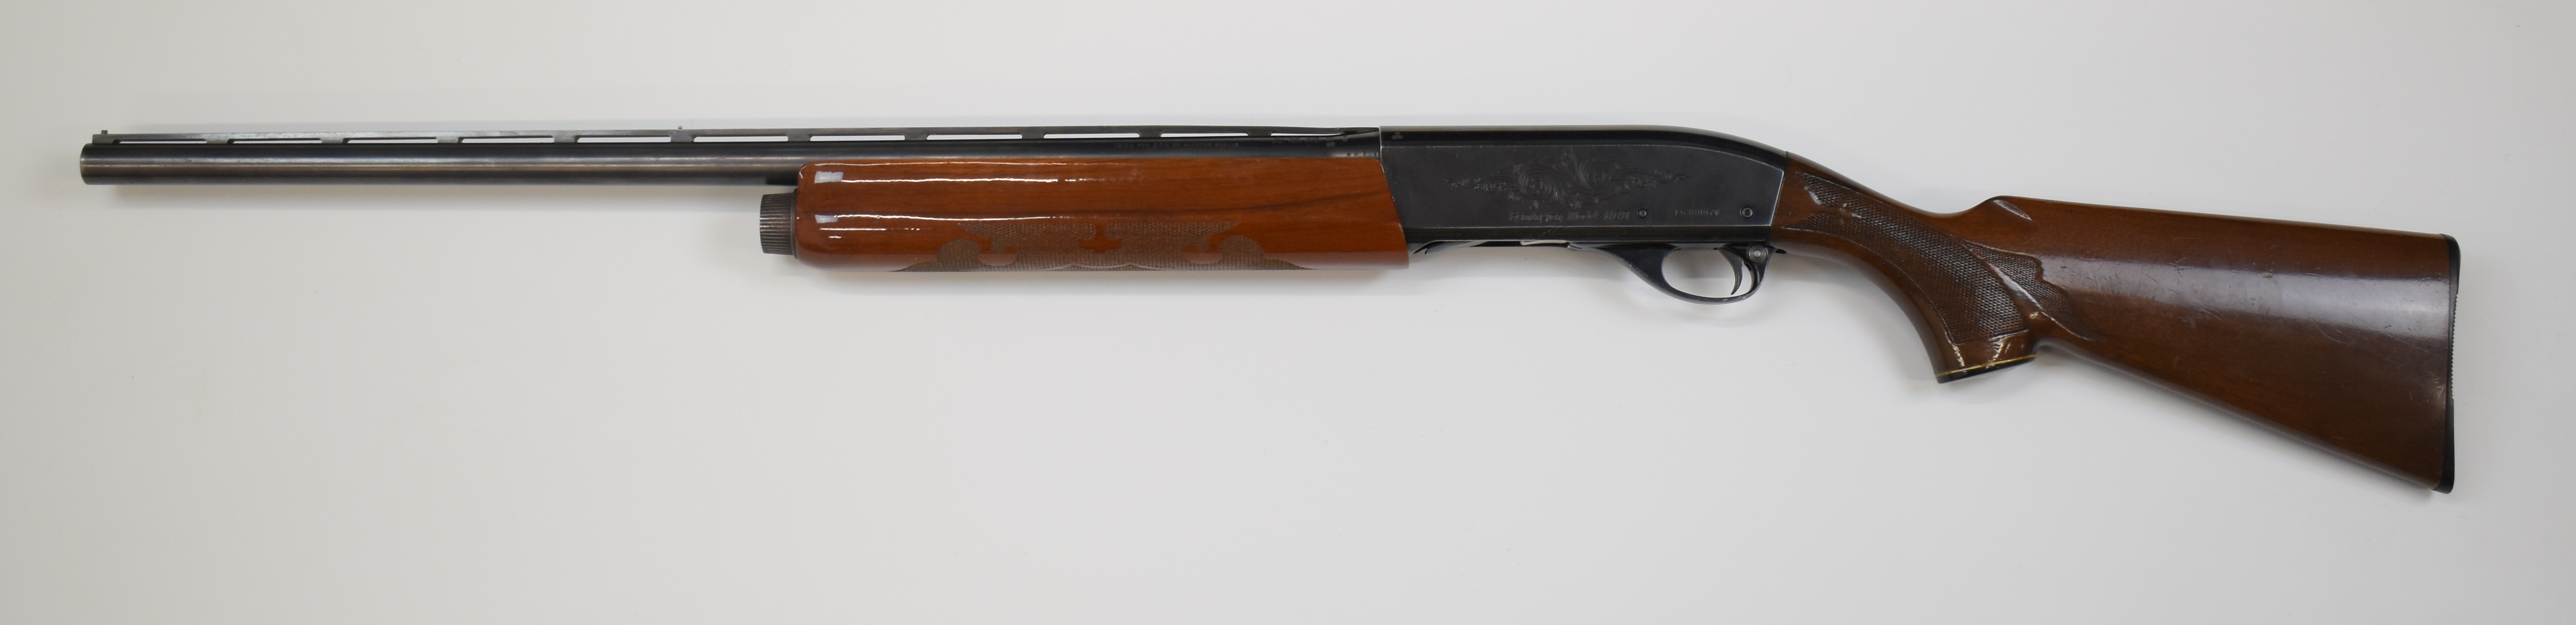 Remington Model 1100 12 bore 3-shot semi-automatic shotgun with ornately carved and chequered semi- - Image 6 of 10